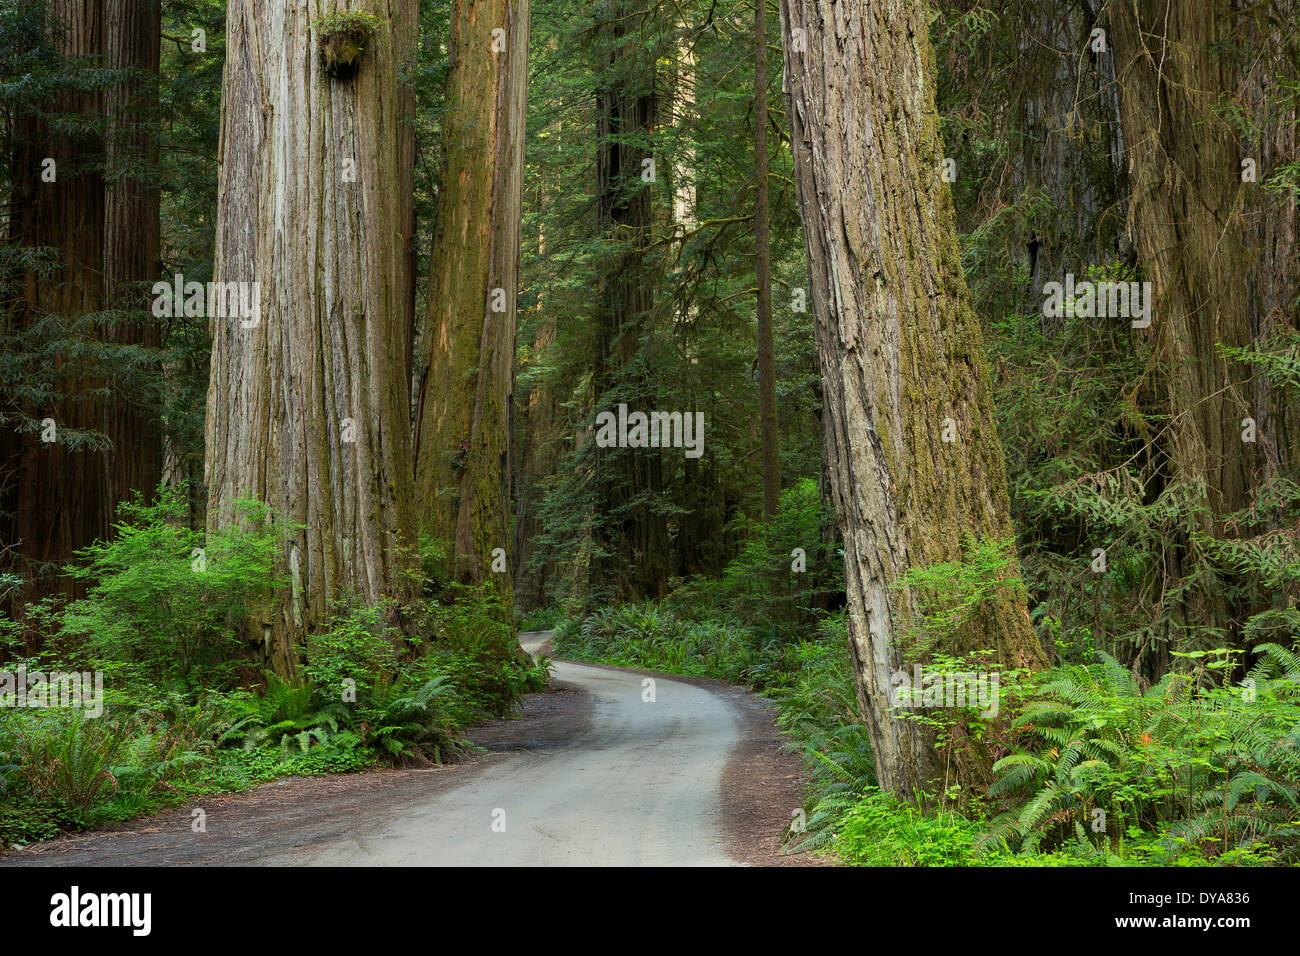 CA California USA America United States Redwood National Park Redwoods Redwood forest Sequoia sempervirens forest tree trees, Stock Photo